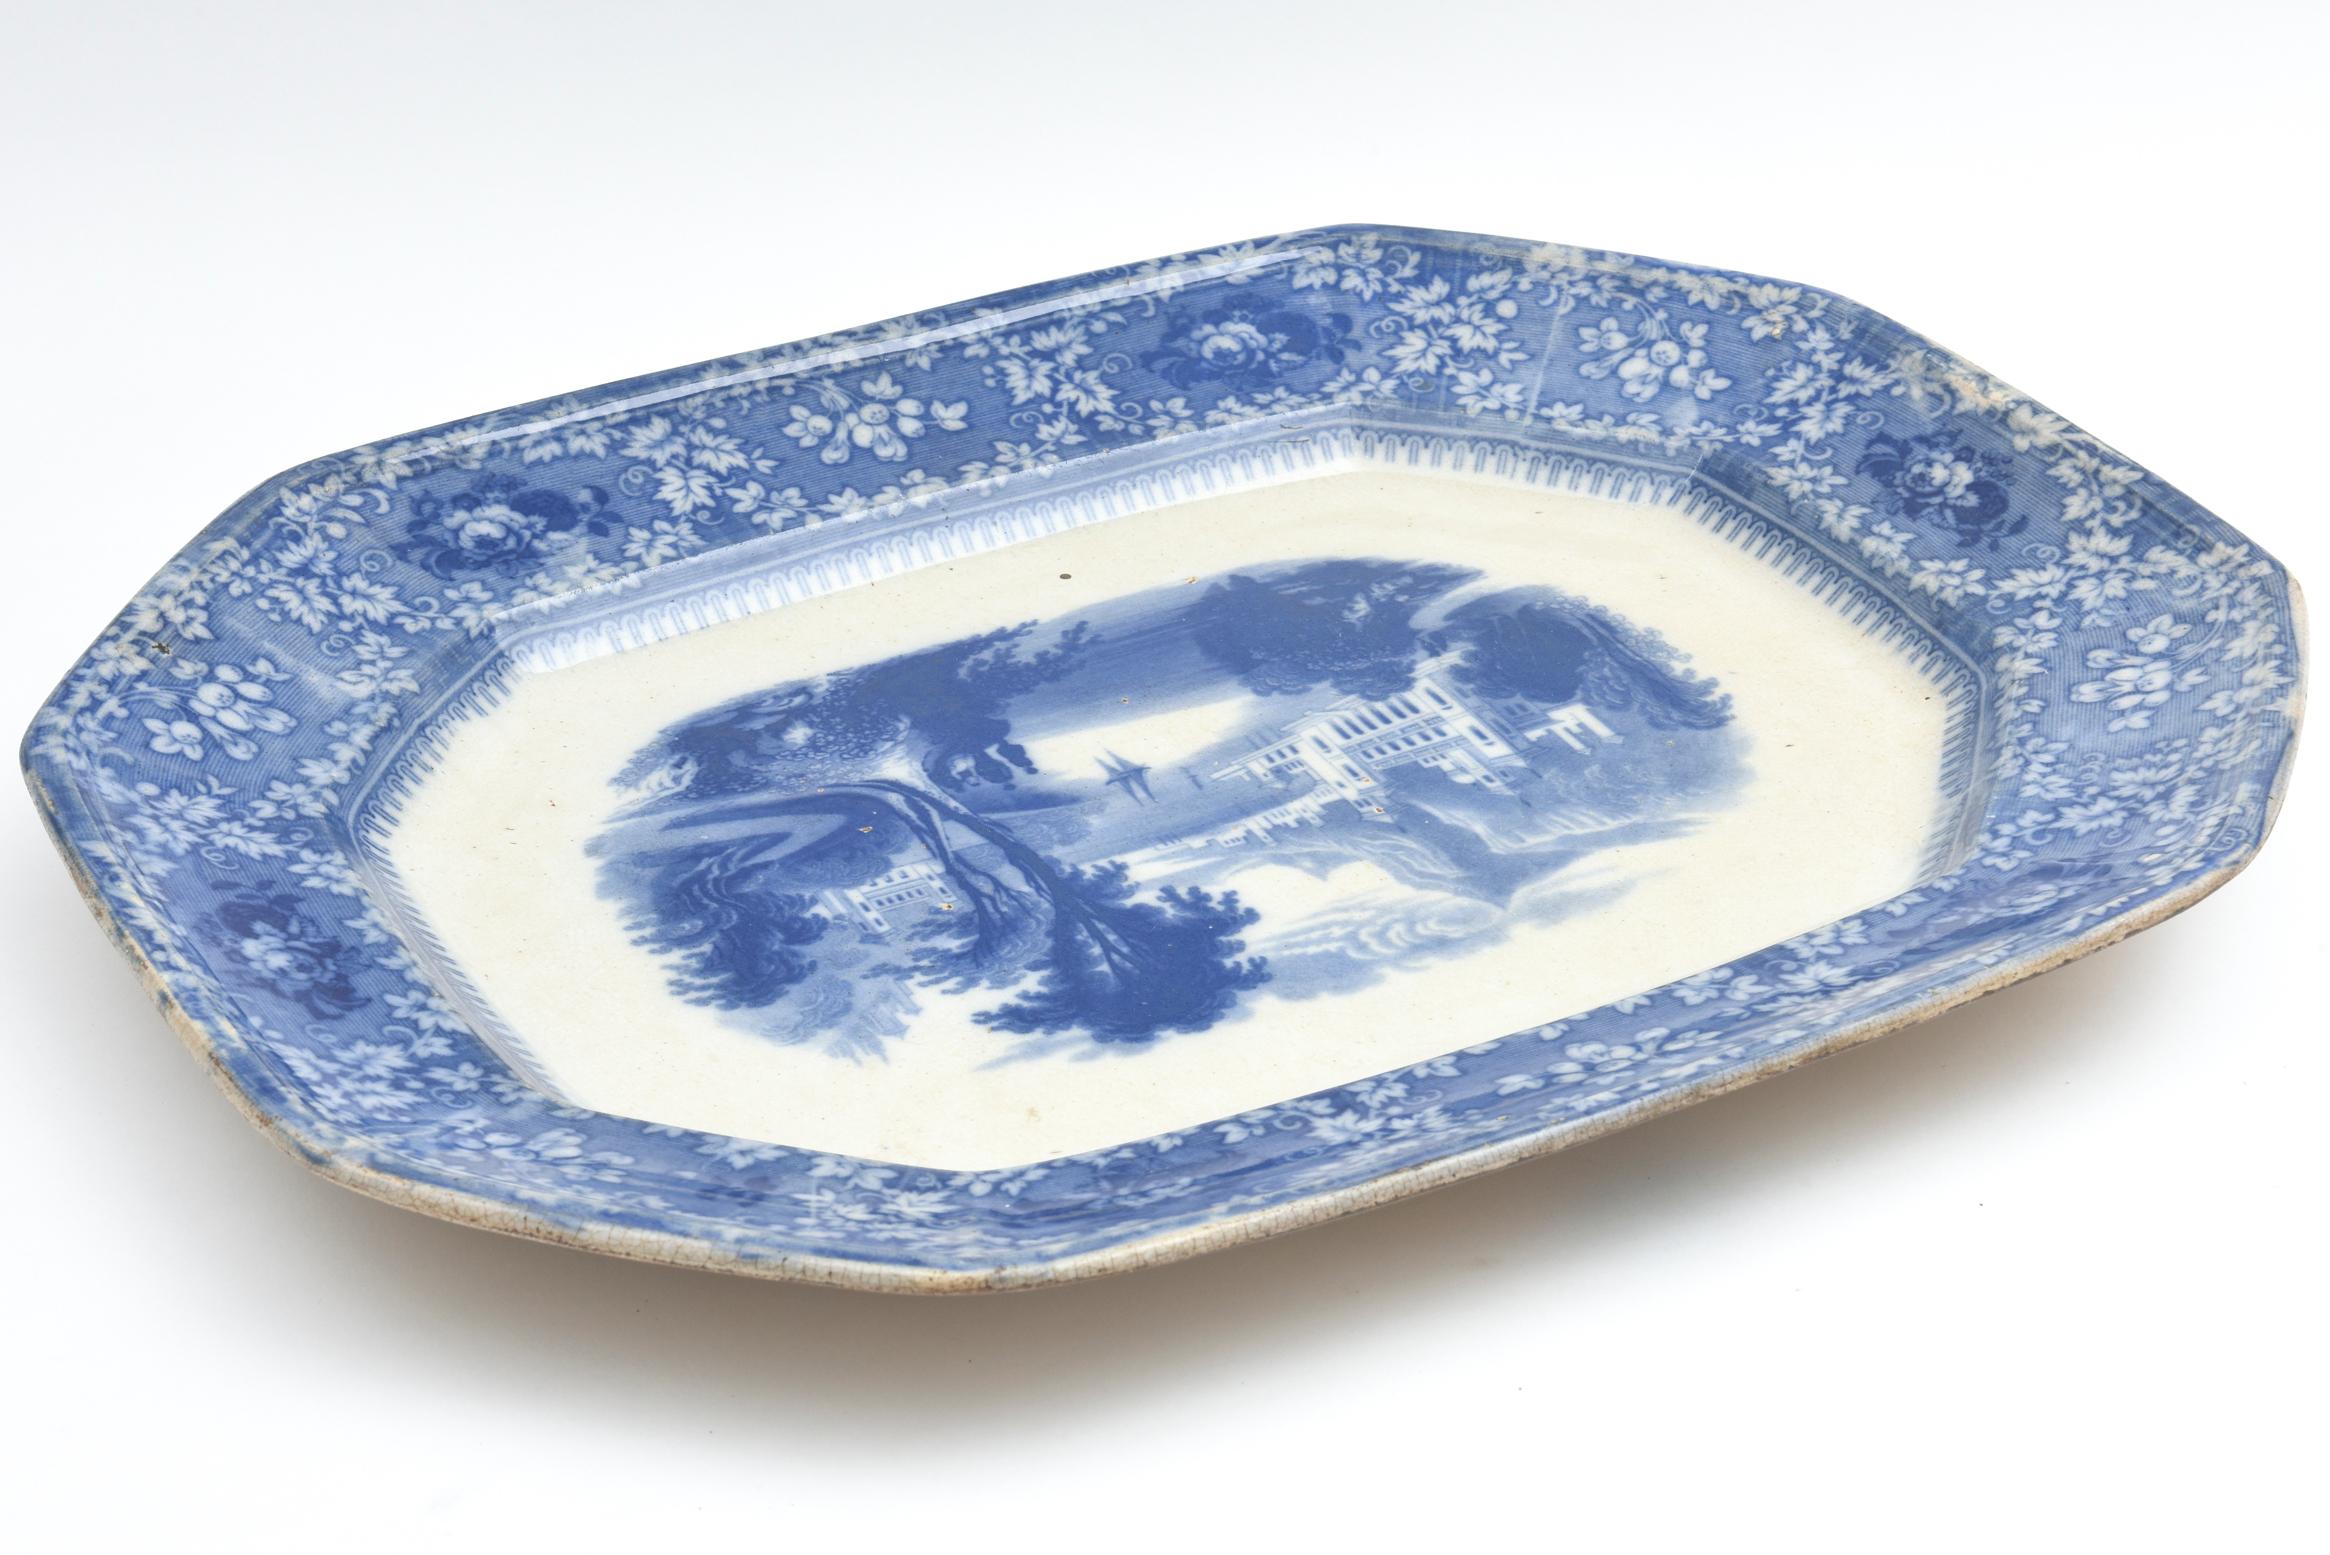 Hand-Crafted Antique Flo Blue Platter, 